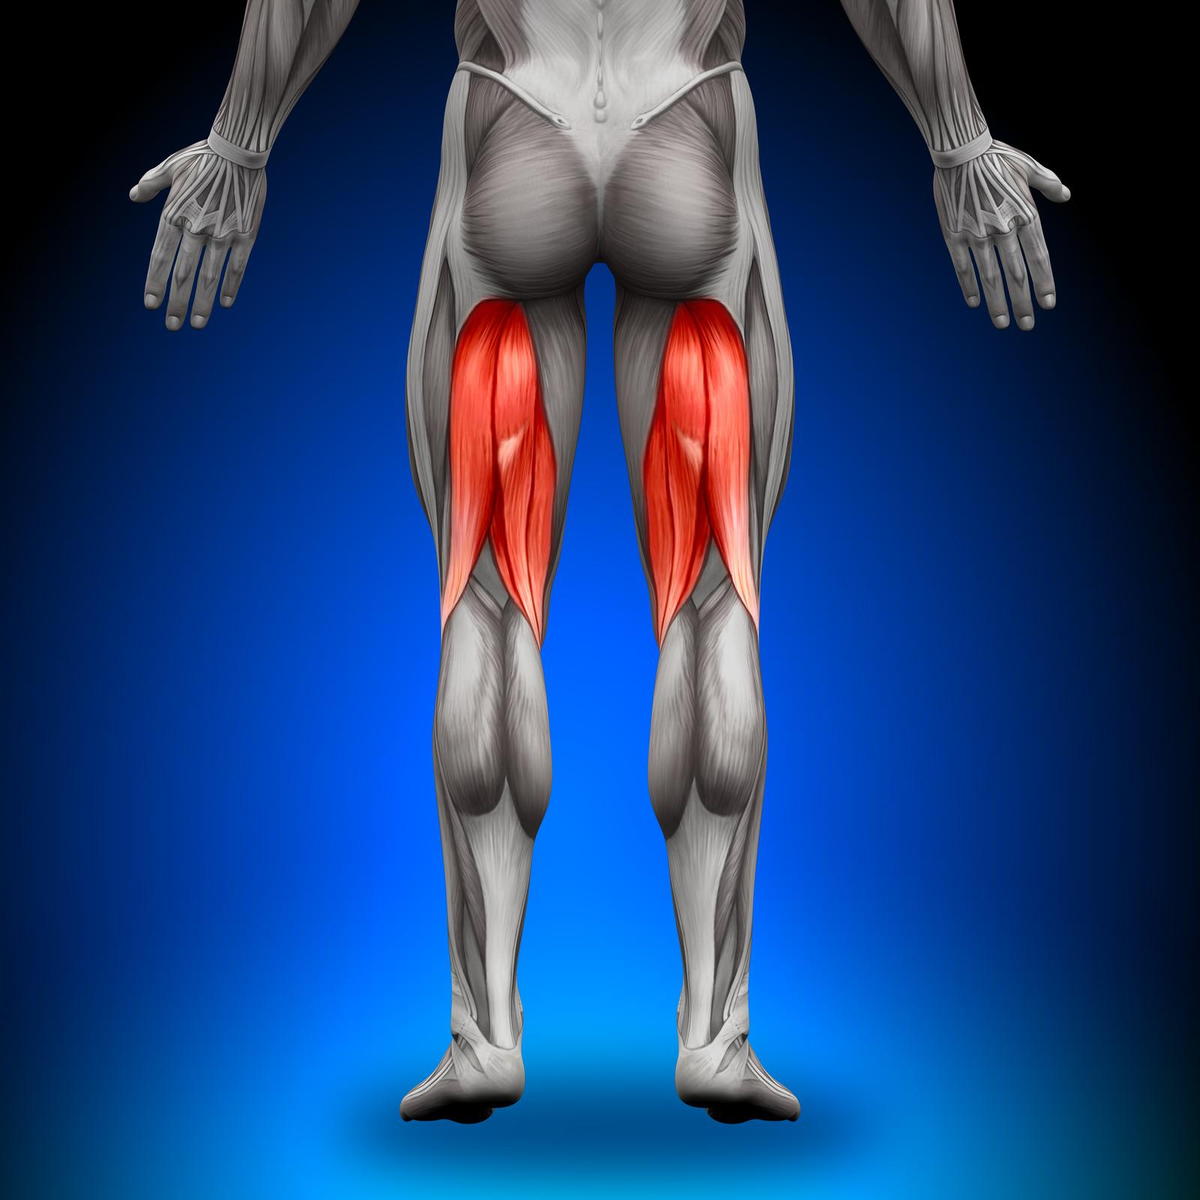 Hamstrings effect on low back pain.